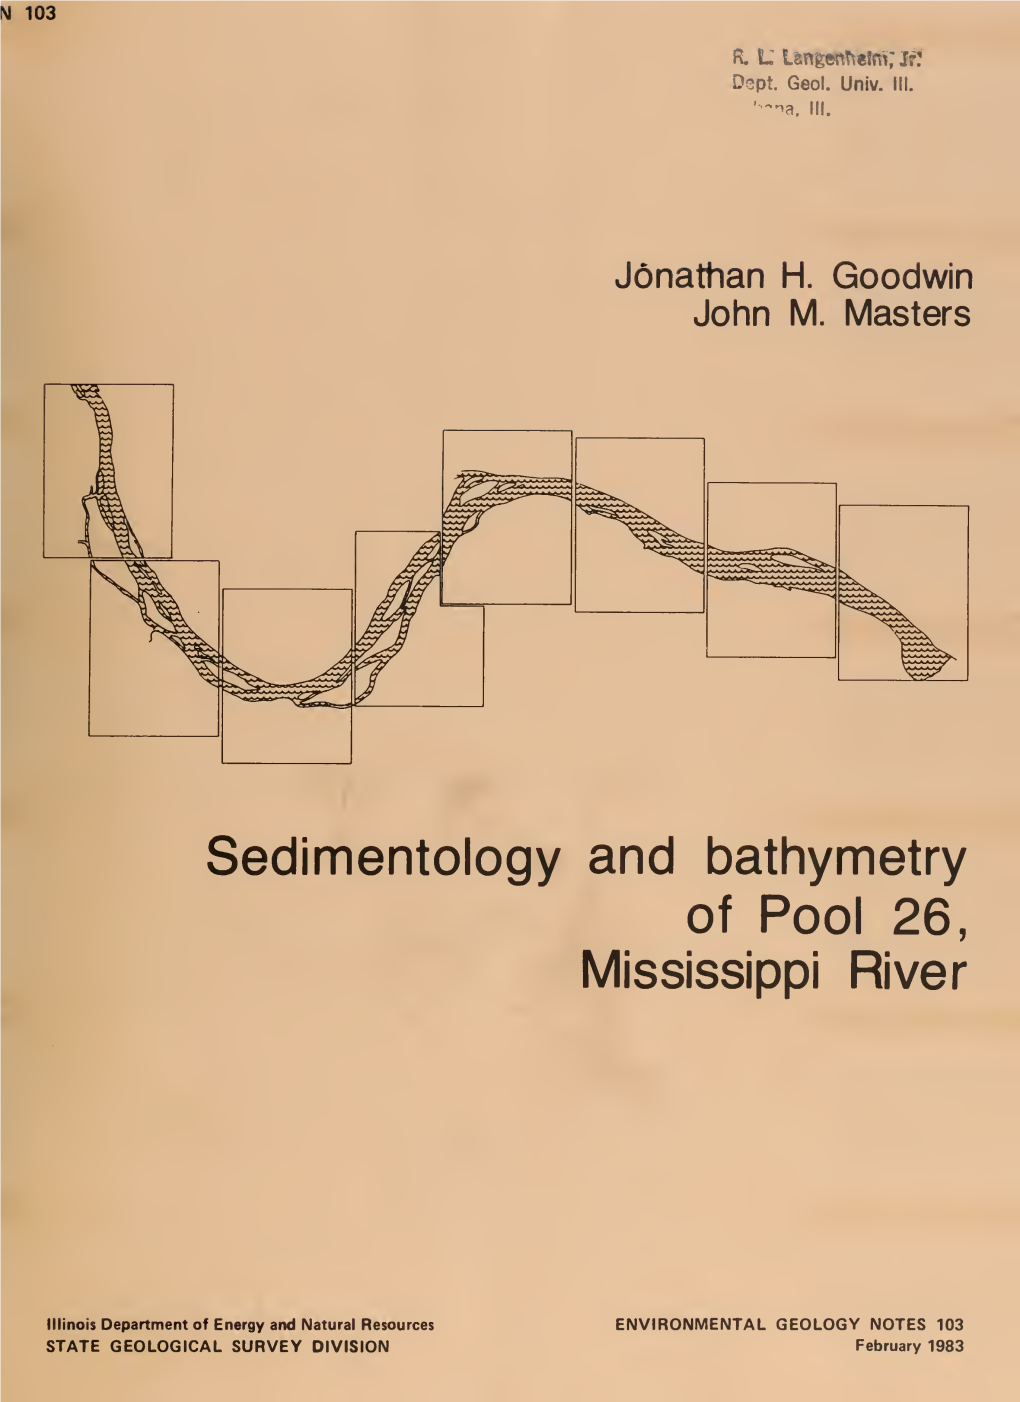 Sedimentology and Bathymetry of Pool 26, Mississippi River, Alton